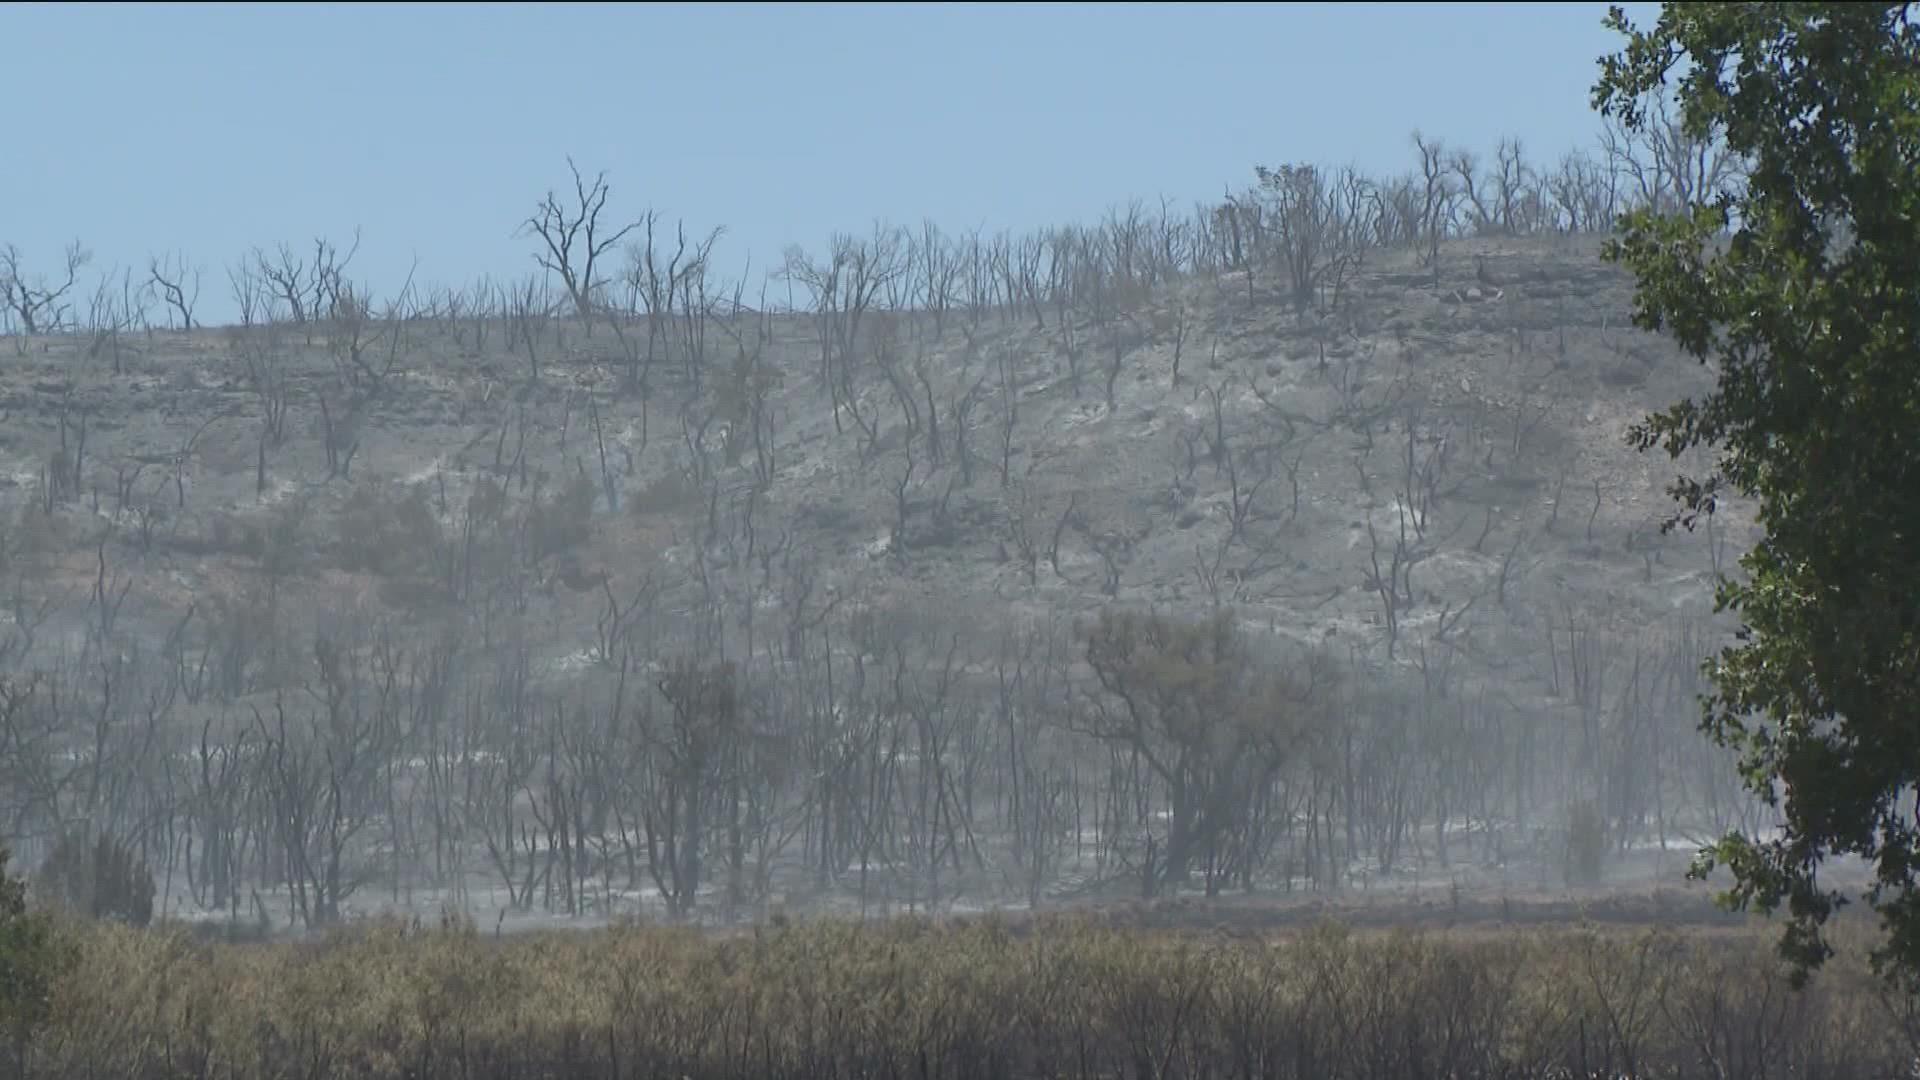 Residents forced to evacuate because of the Hermosa fire near Wimberley were allowed to return home Friday evening.